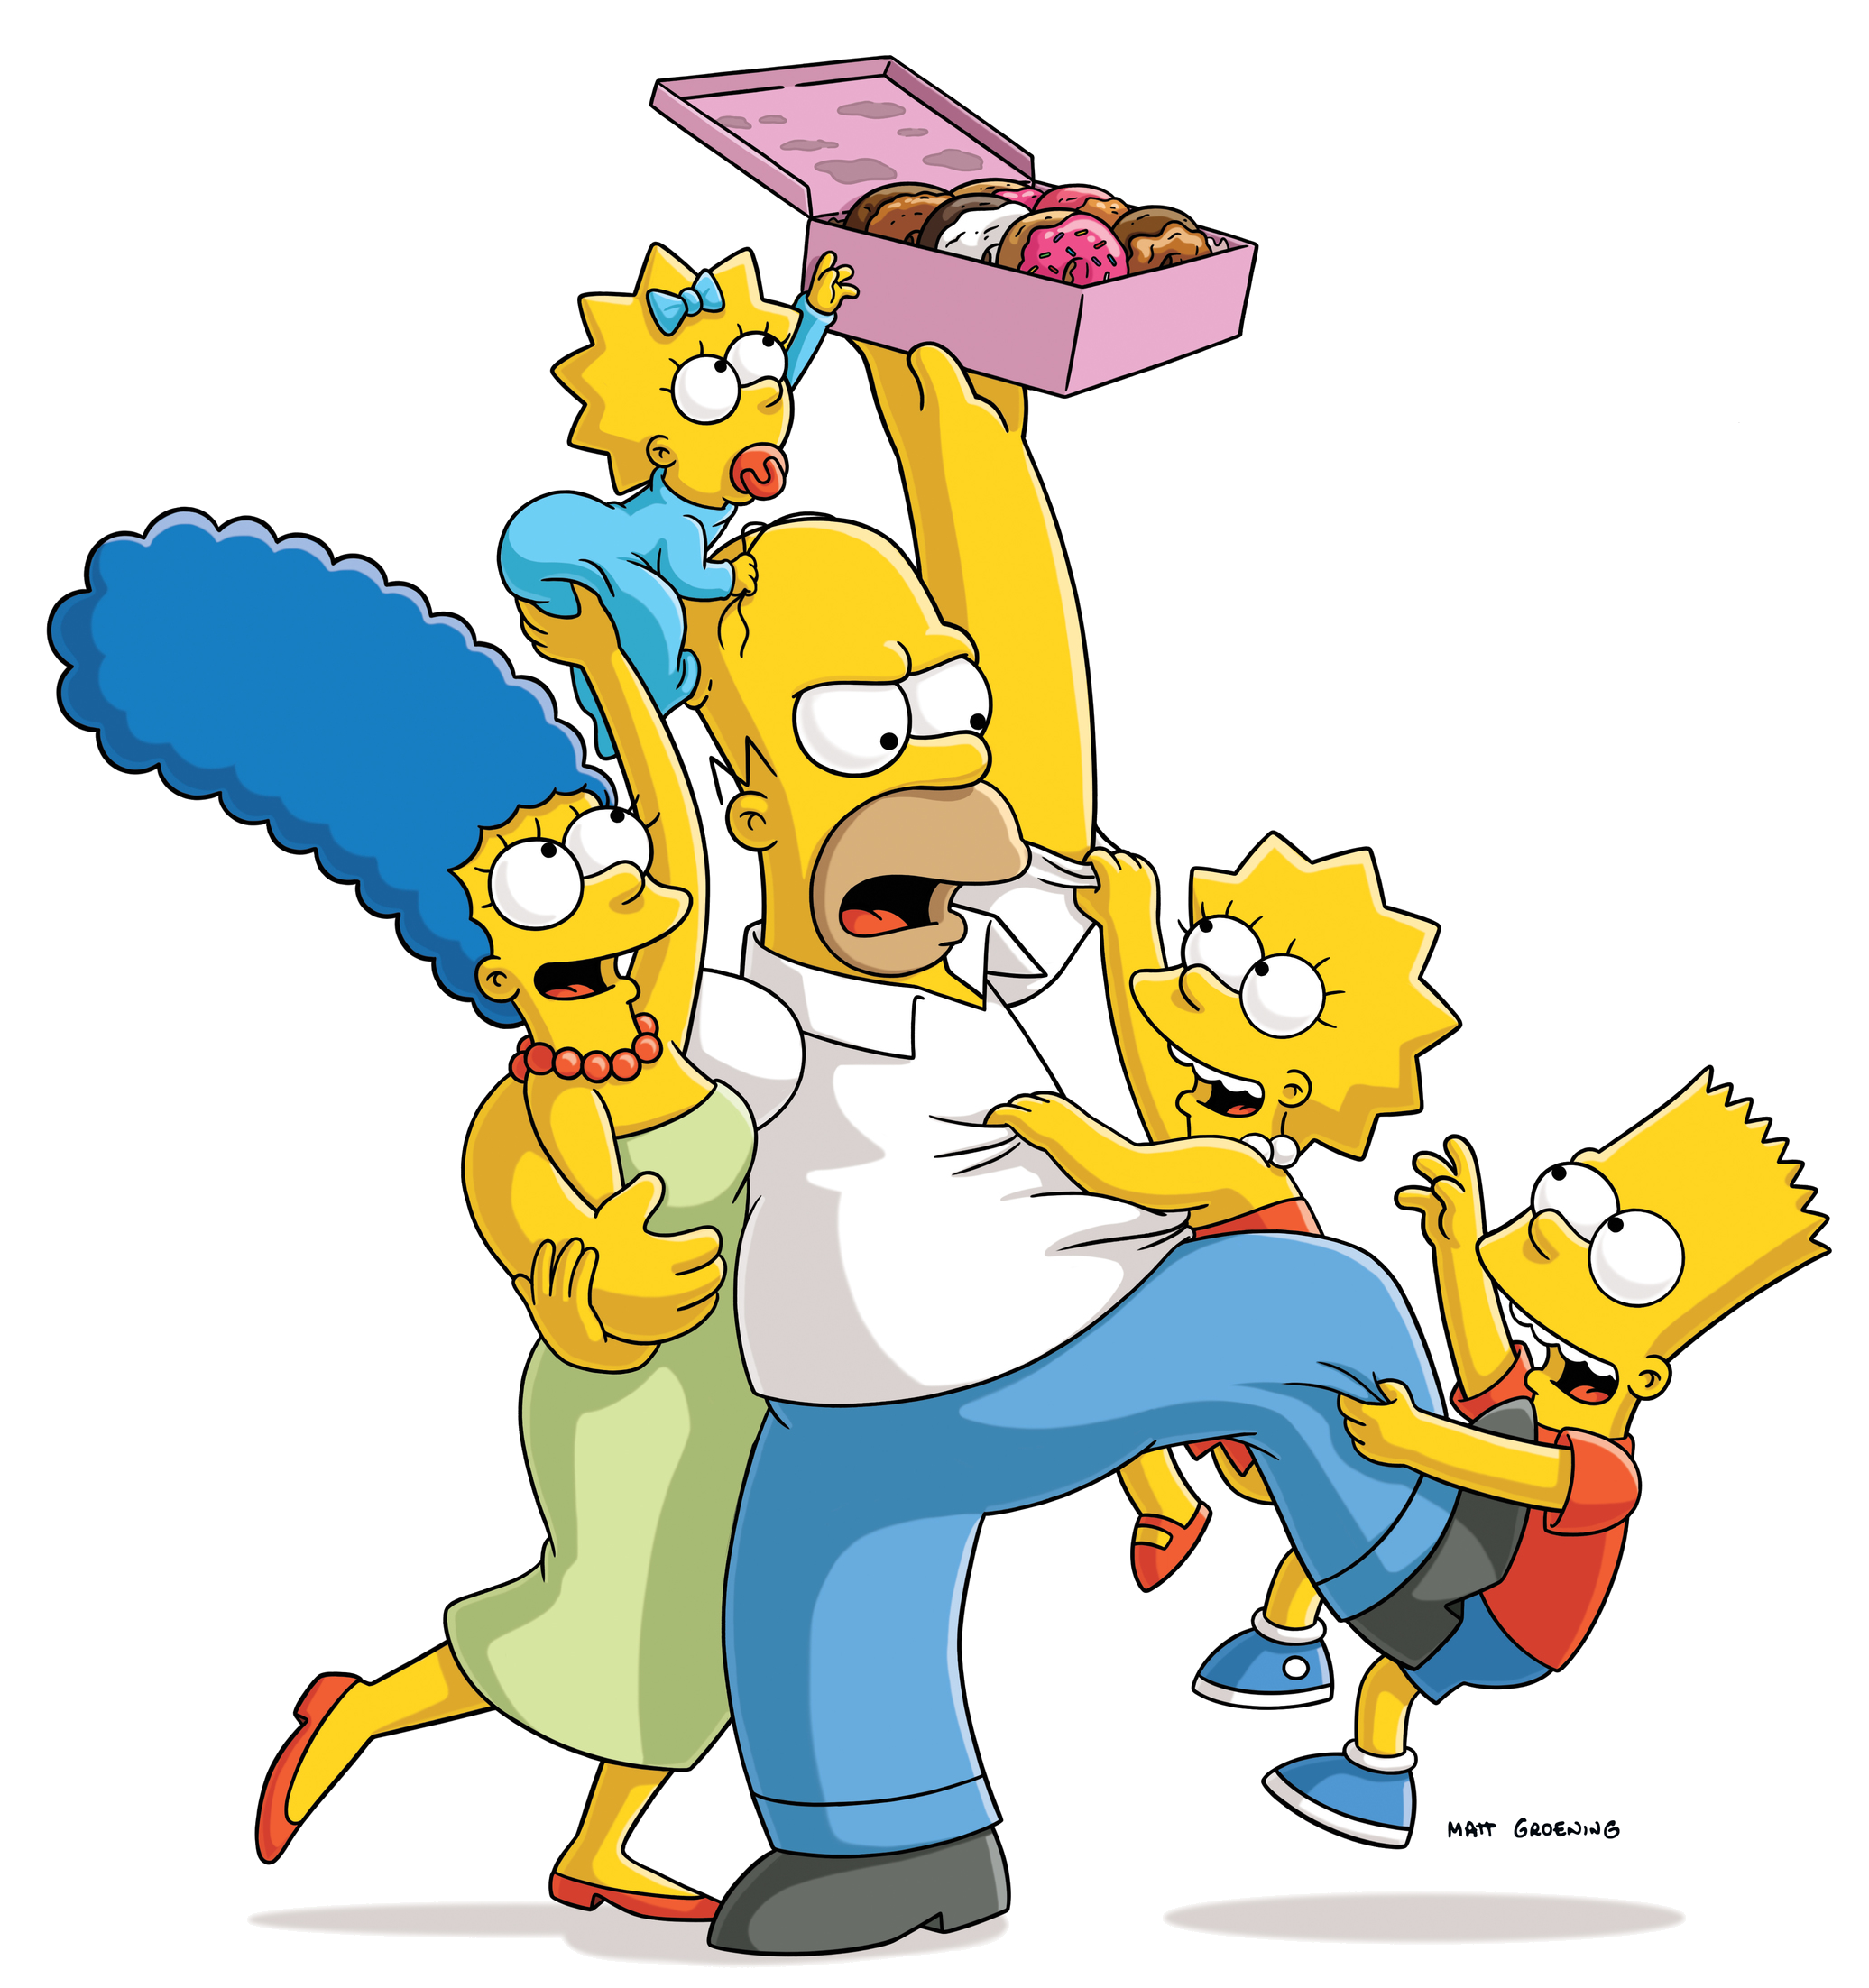 Love Tester - Wikisimpsons, the Simpsons Wiki